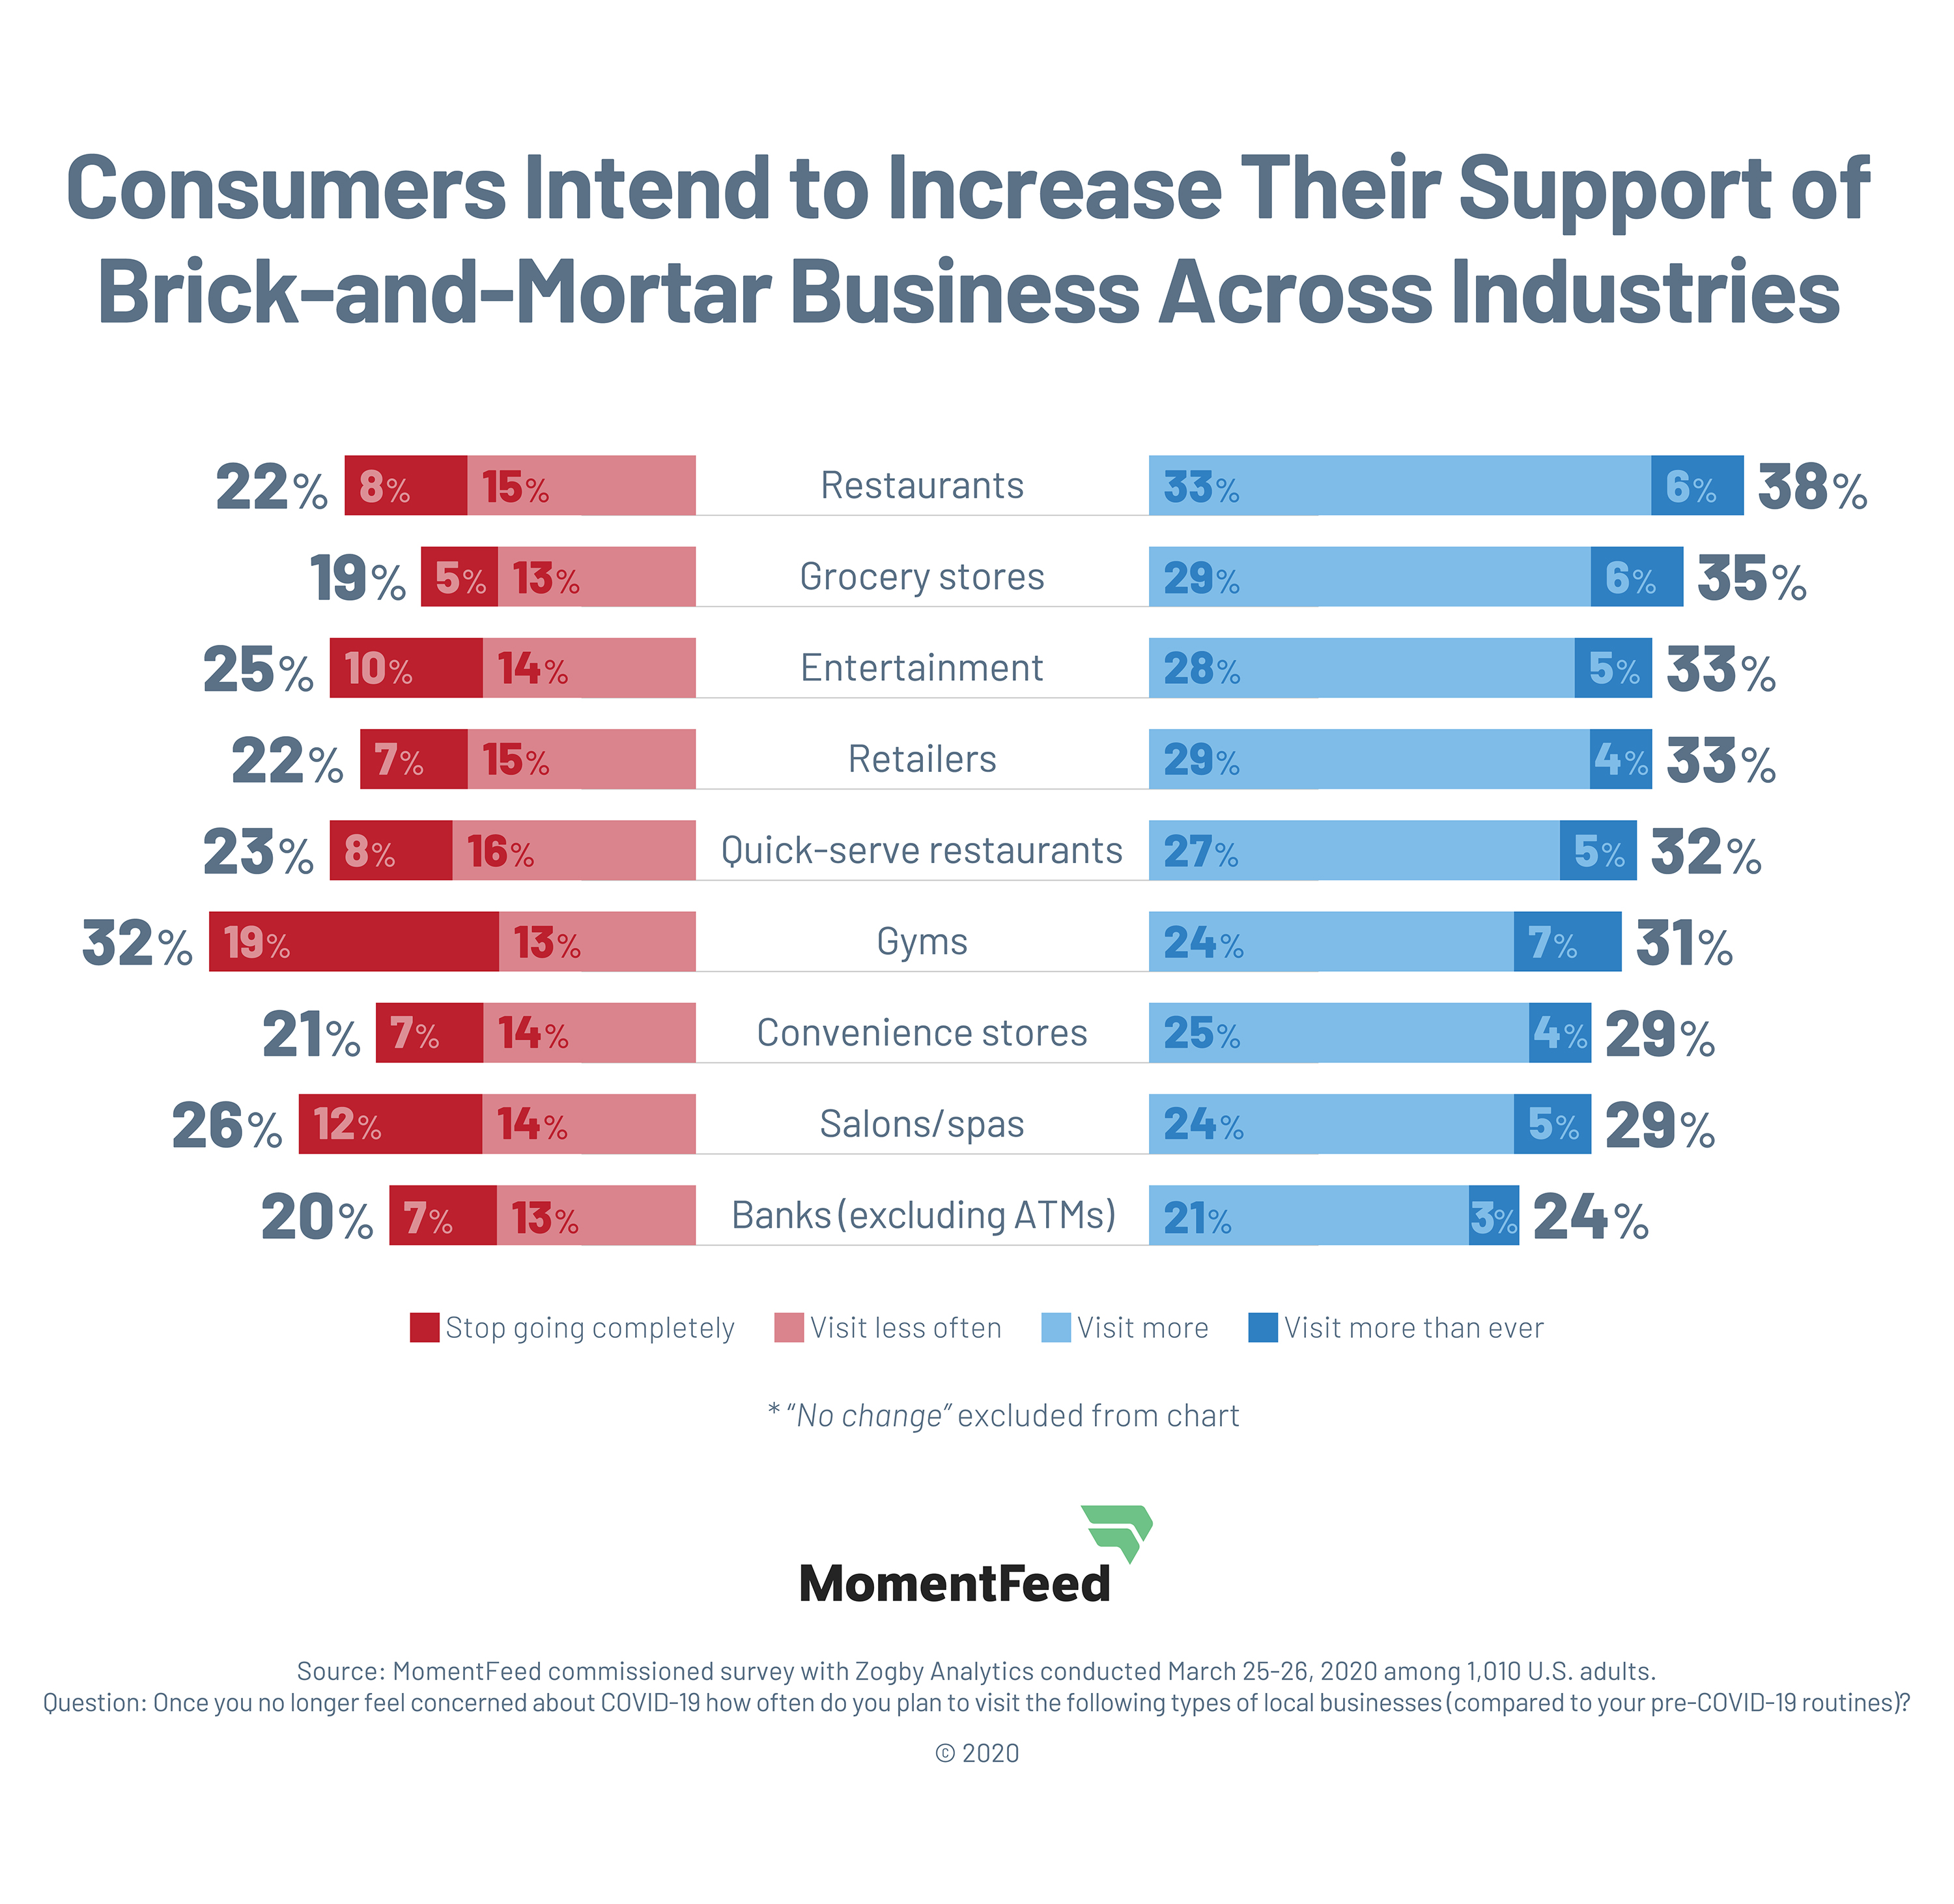 Across all industries – with the exception of gyms – consumers expect to visit brick-and-mortar businesses more often rather than less often when compared to pre-COVID-19 behavior.